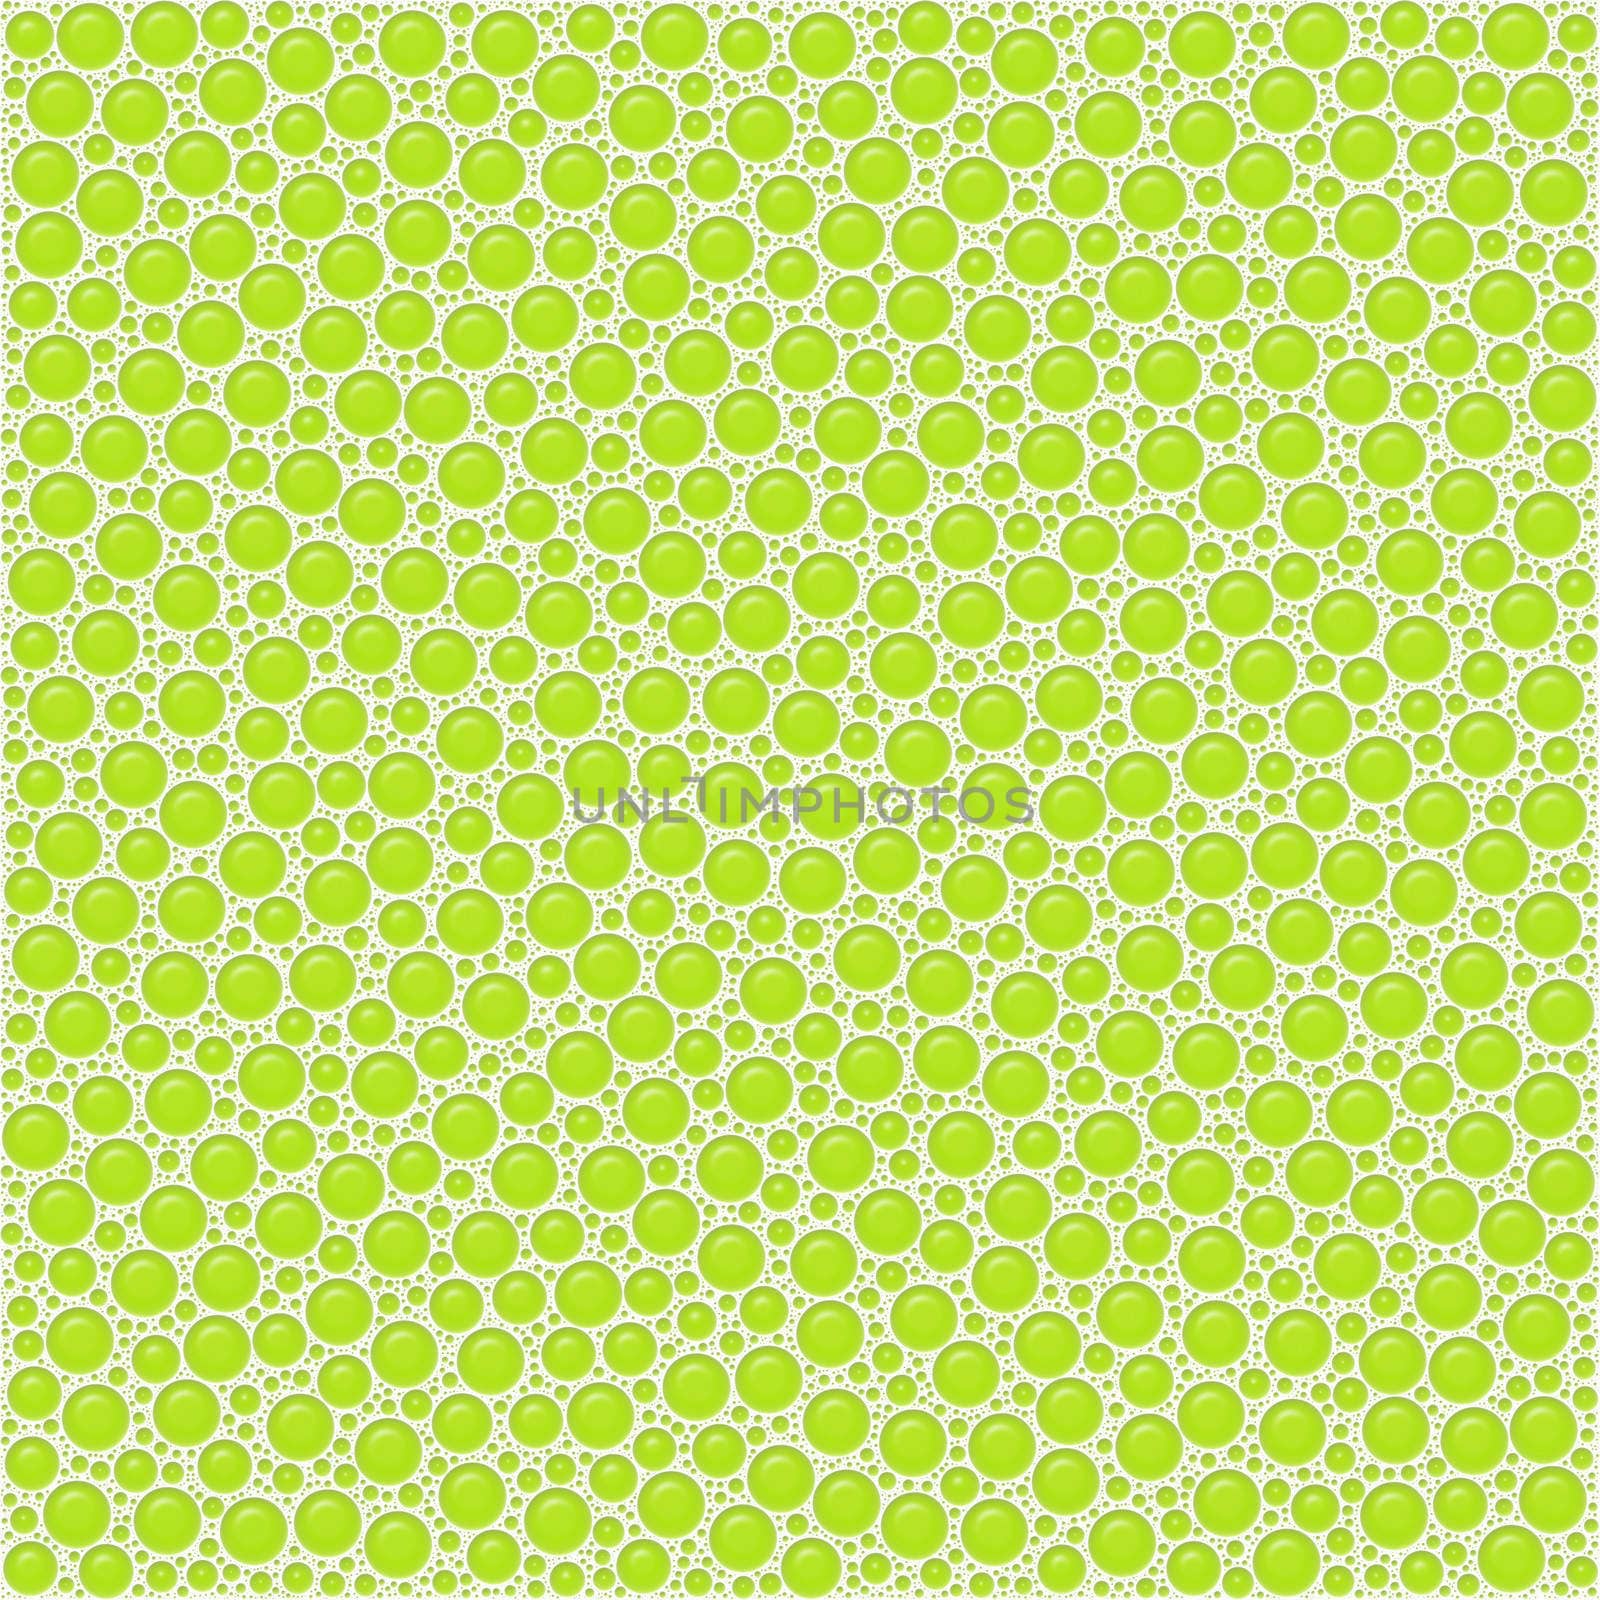 Bubbles, green abstract background by sfinks